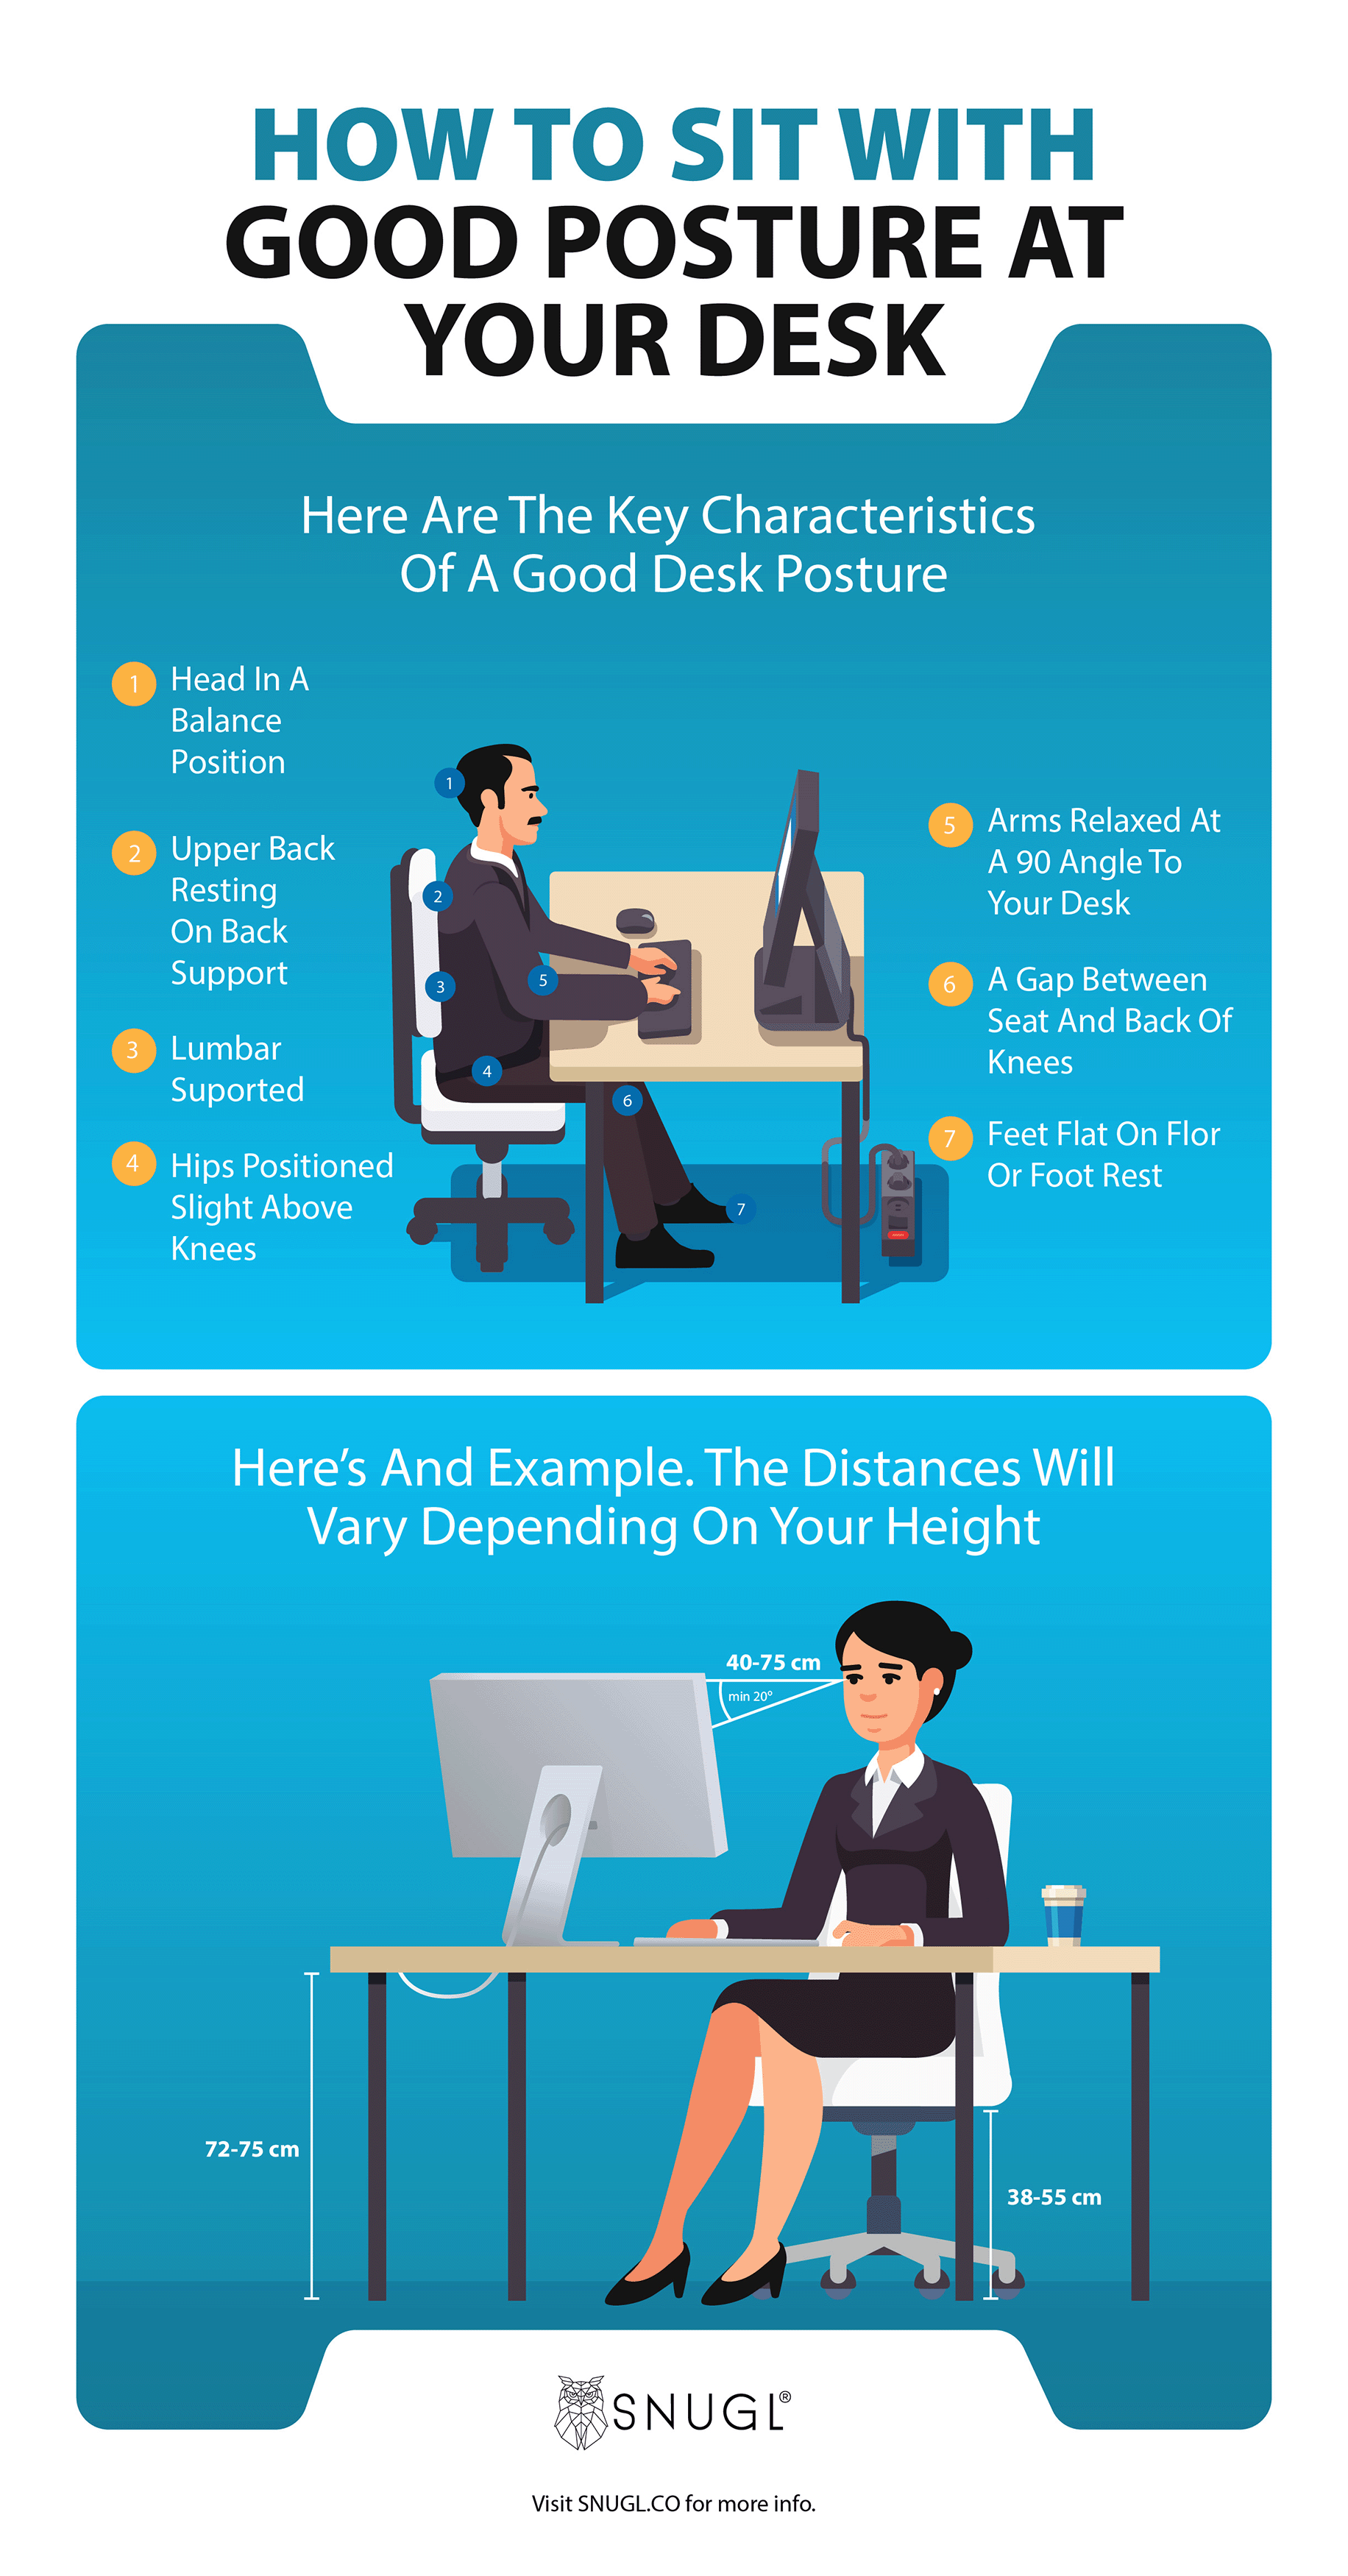 Two diagrams showing difference aspects of good desk posture and how to sit correctly at a desk